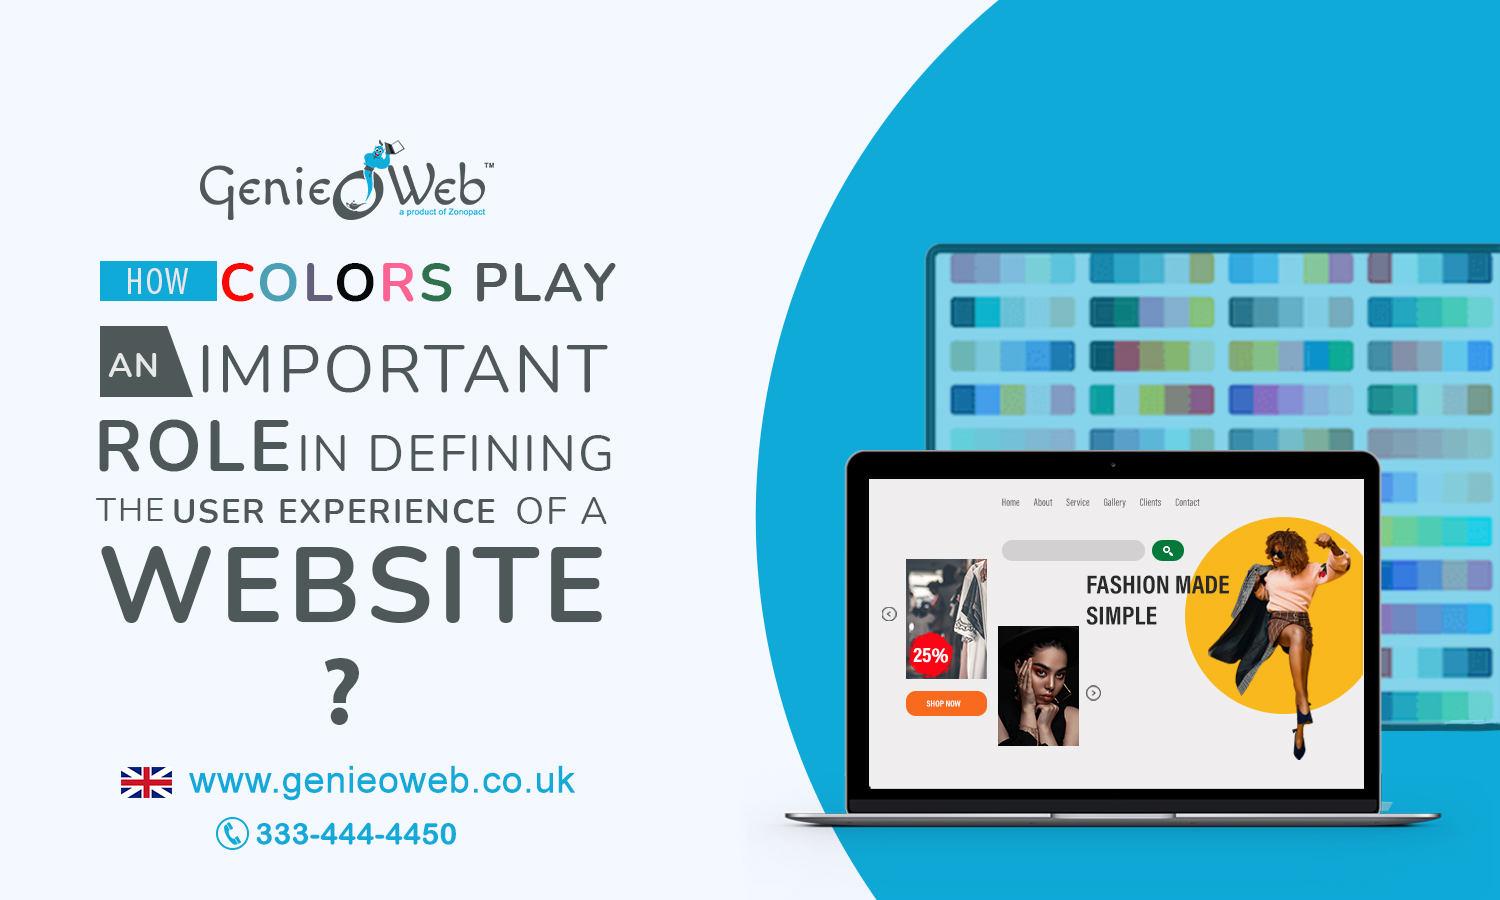 How Colors Play an Important Role in Defining the User Experience of a Website